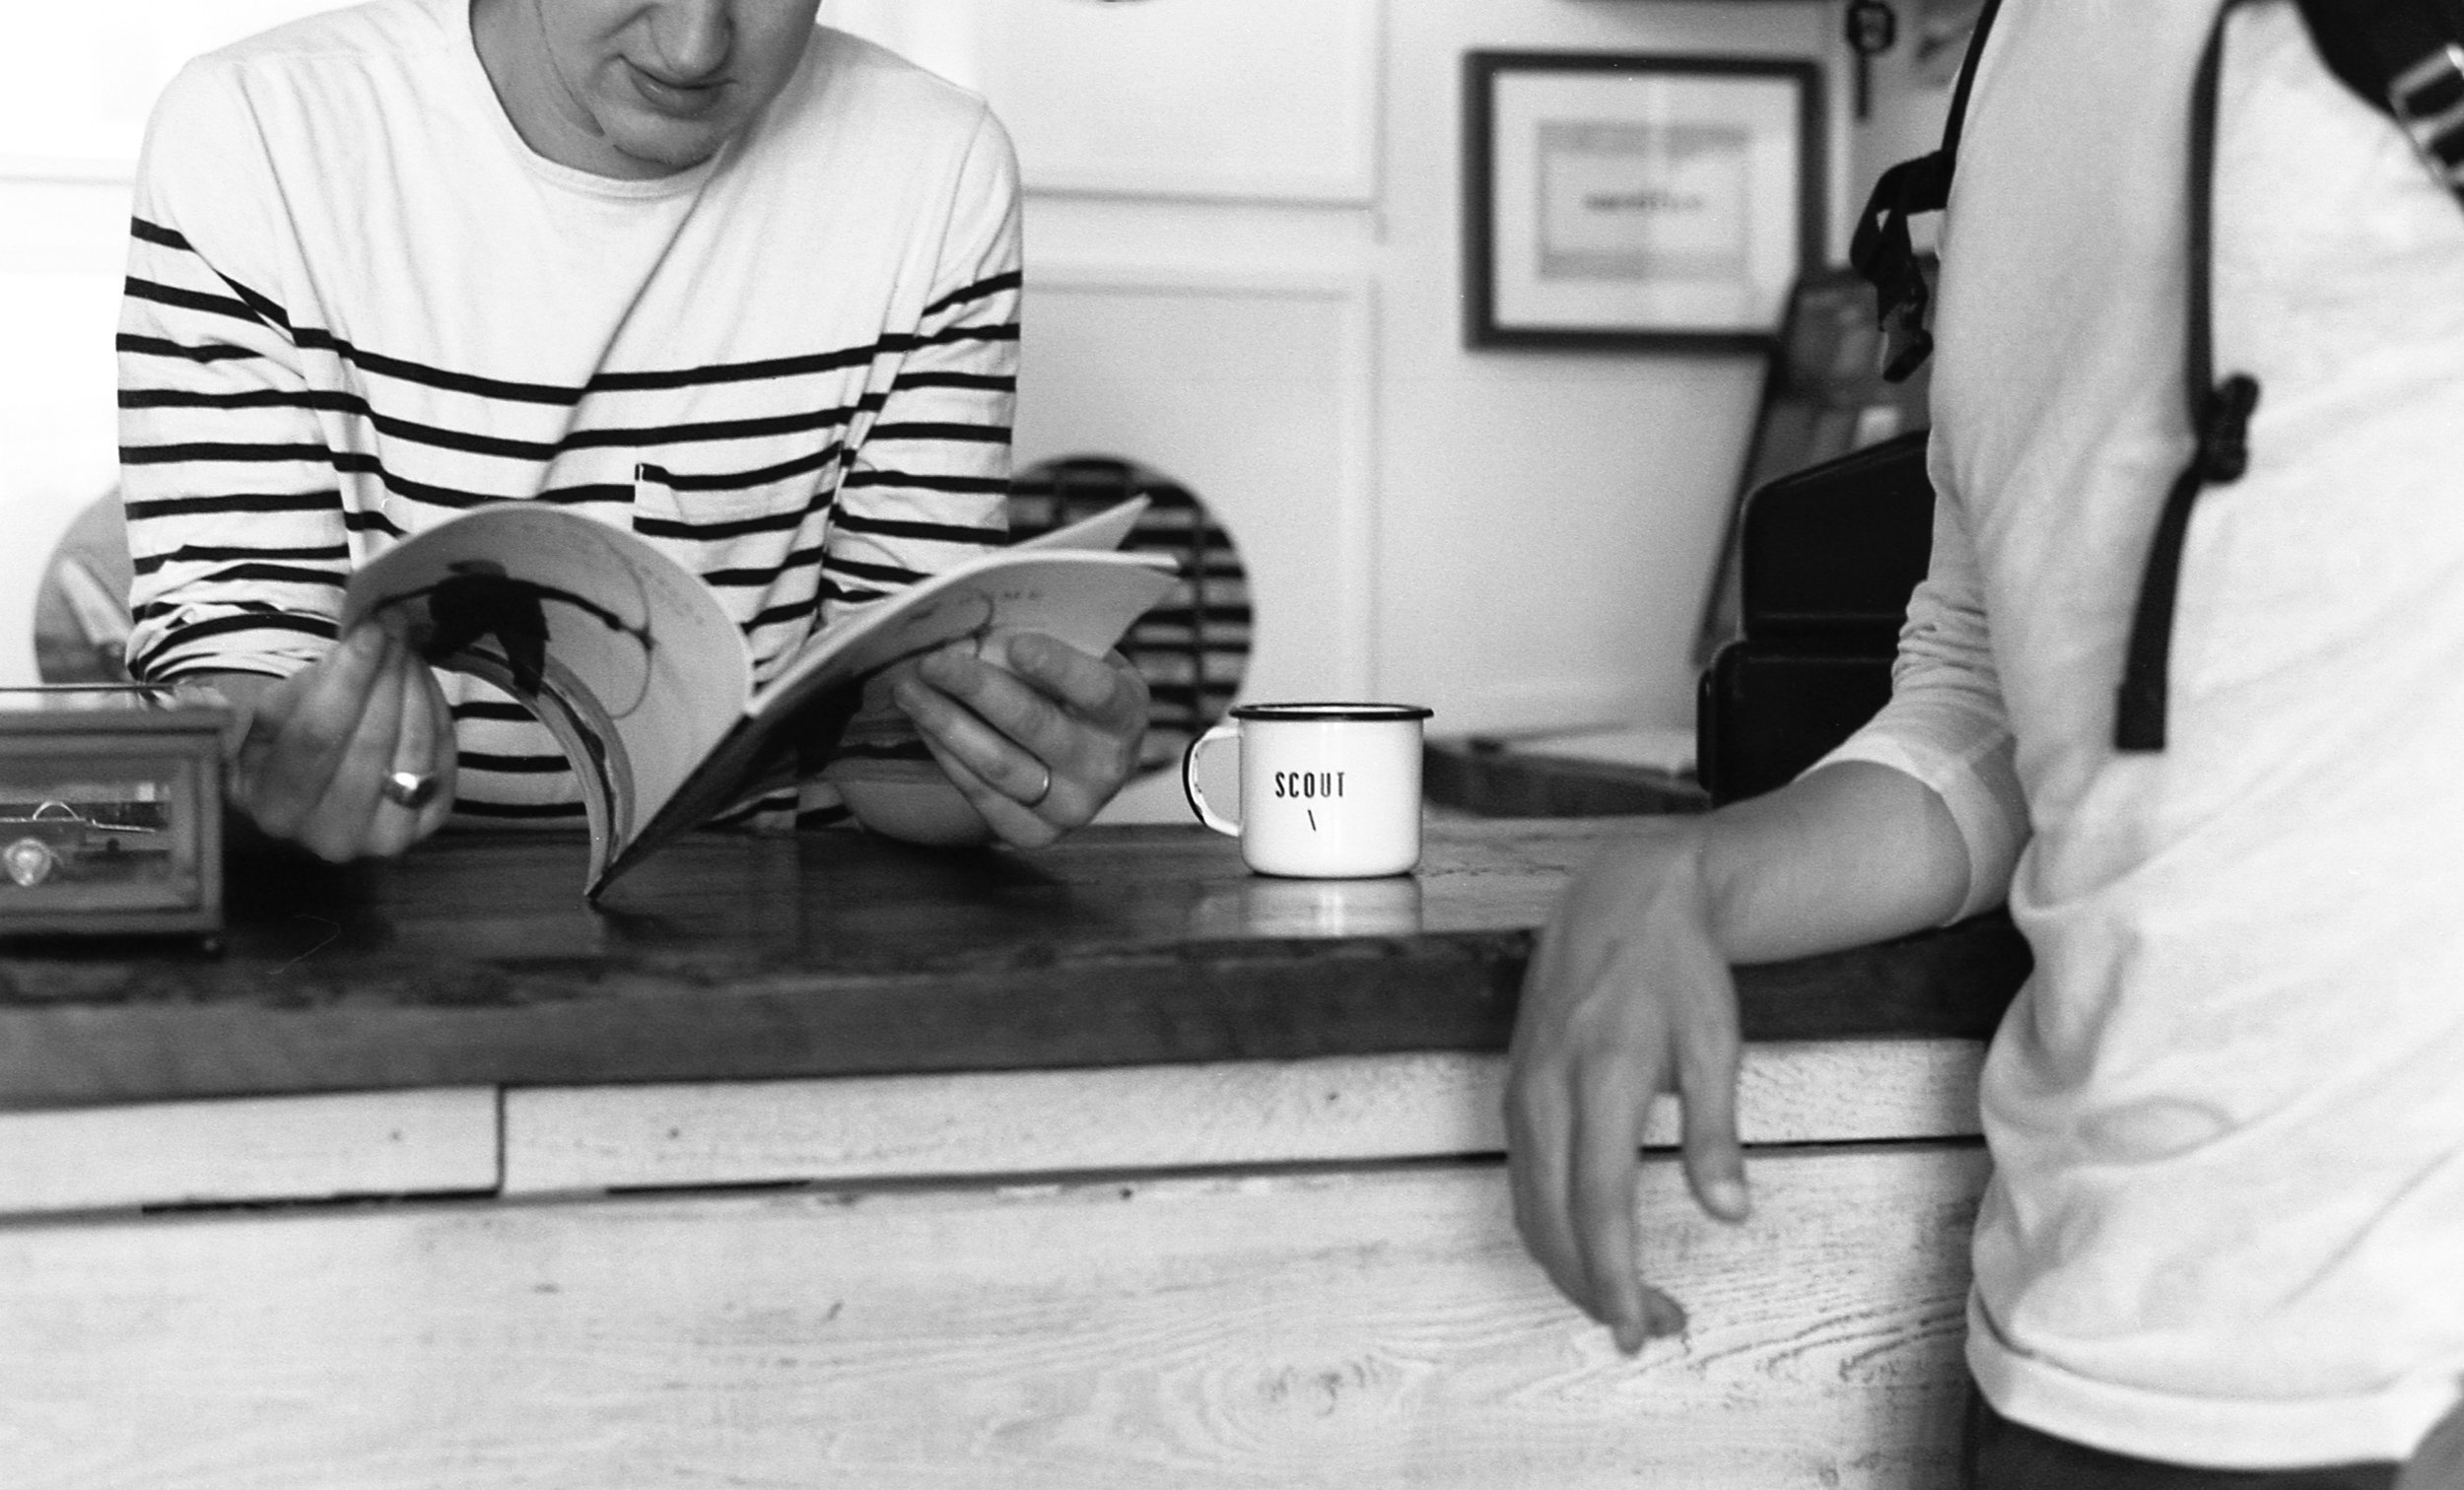 Two people lean on a cafe counter, one reading a magazine